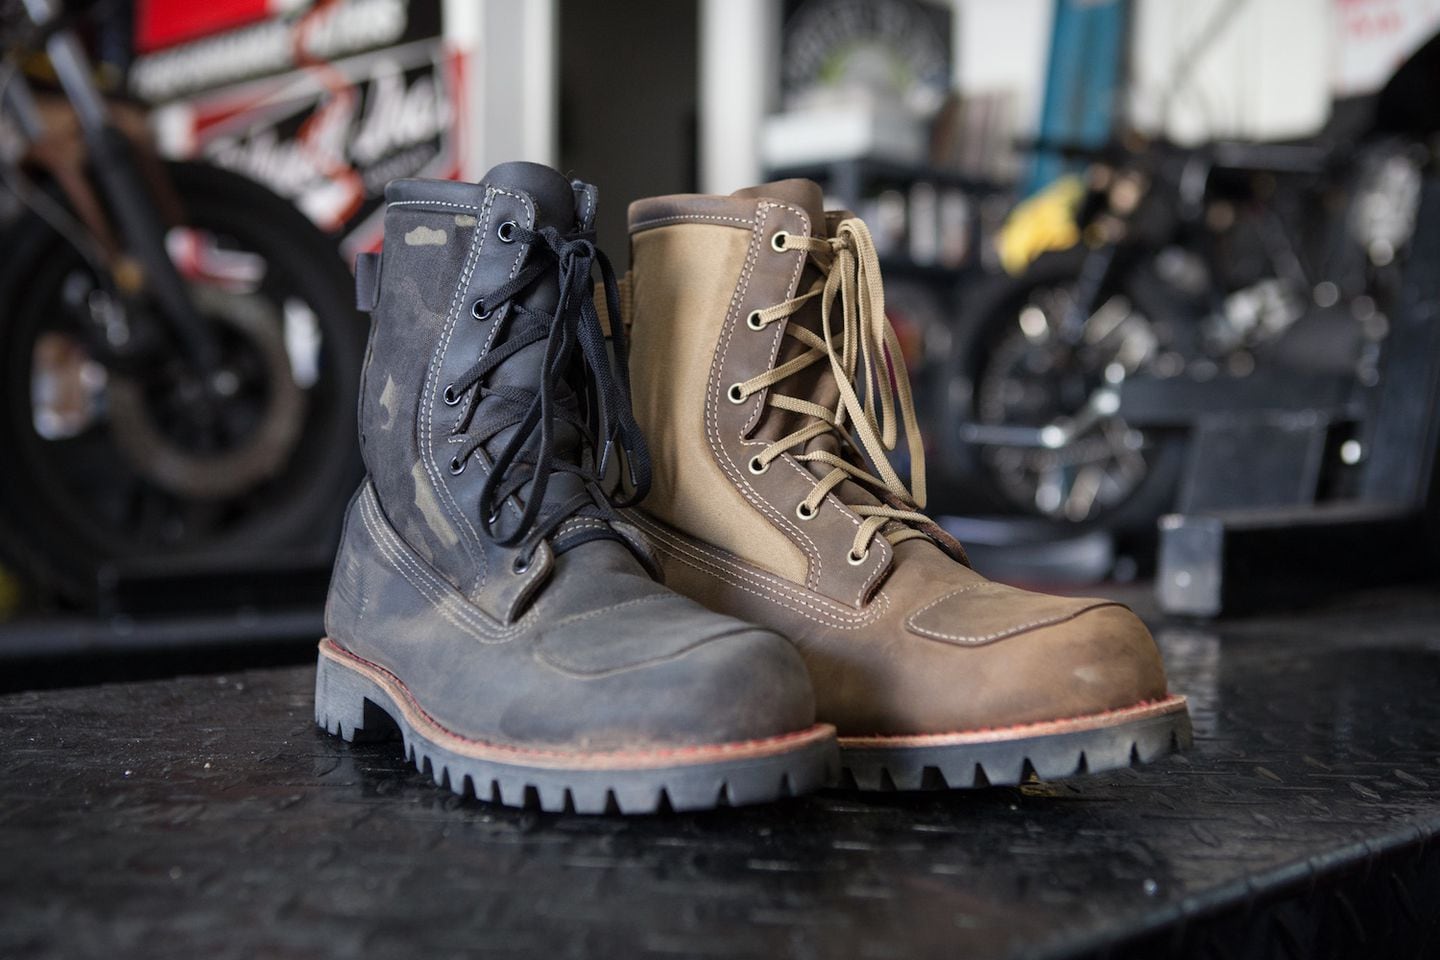 New Military Style Motorcycle Boots From Bates Footwear | Motorcyclist